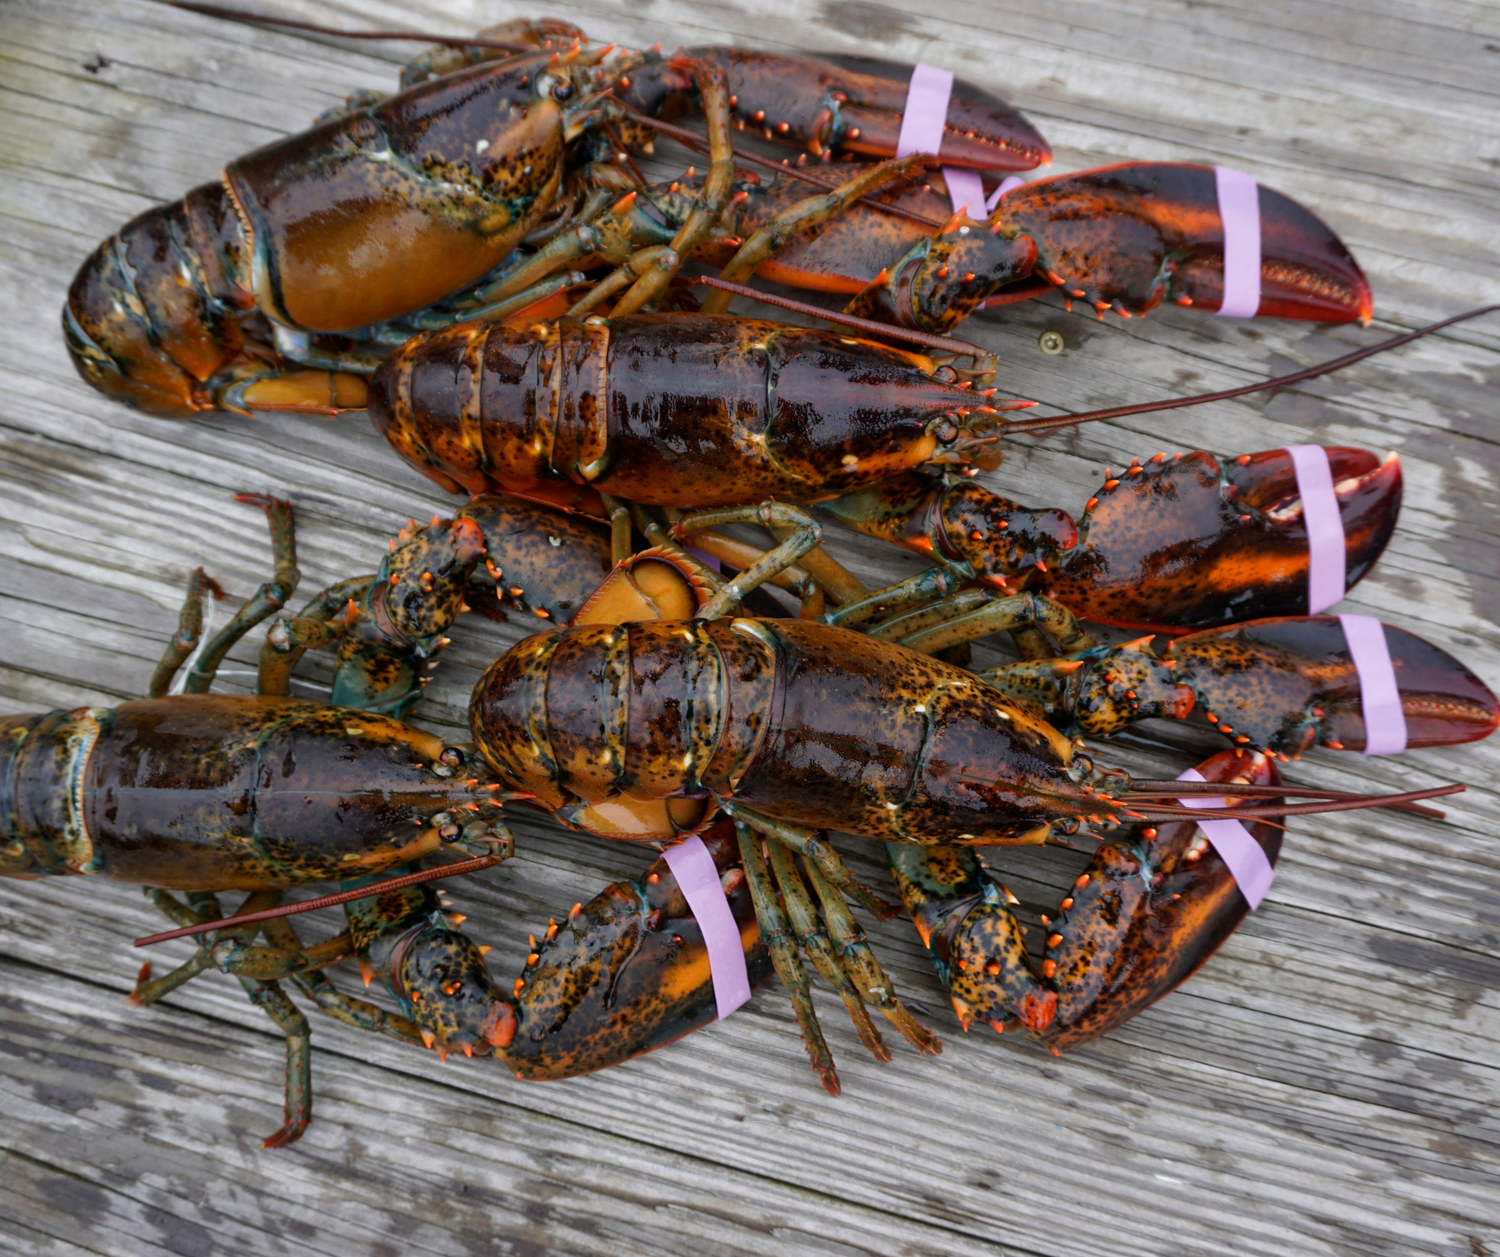 Canada stops using observer companies for monitoring bycatch in Nova Scotia lobster fishery